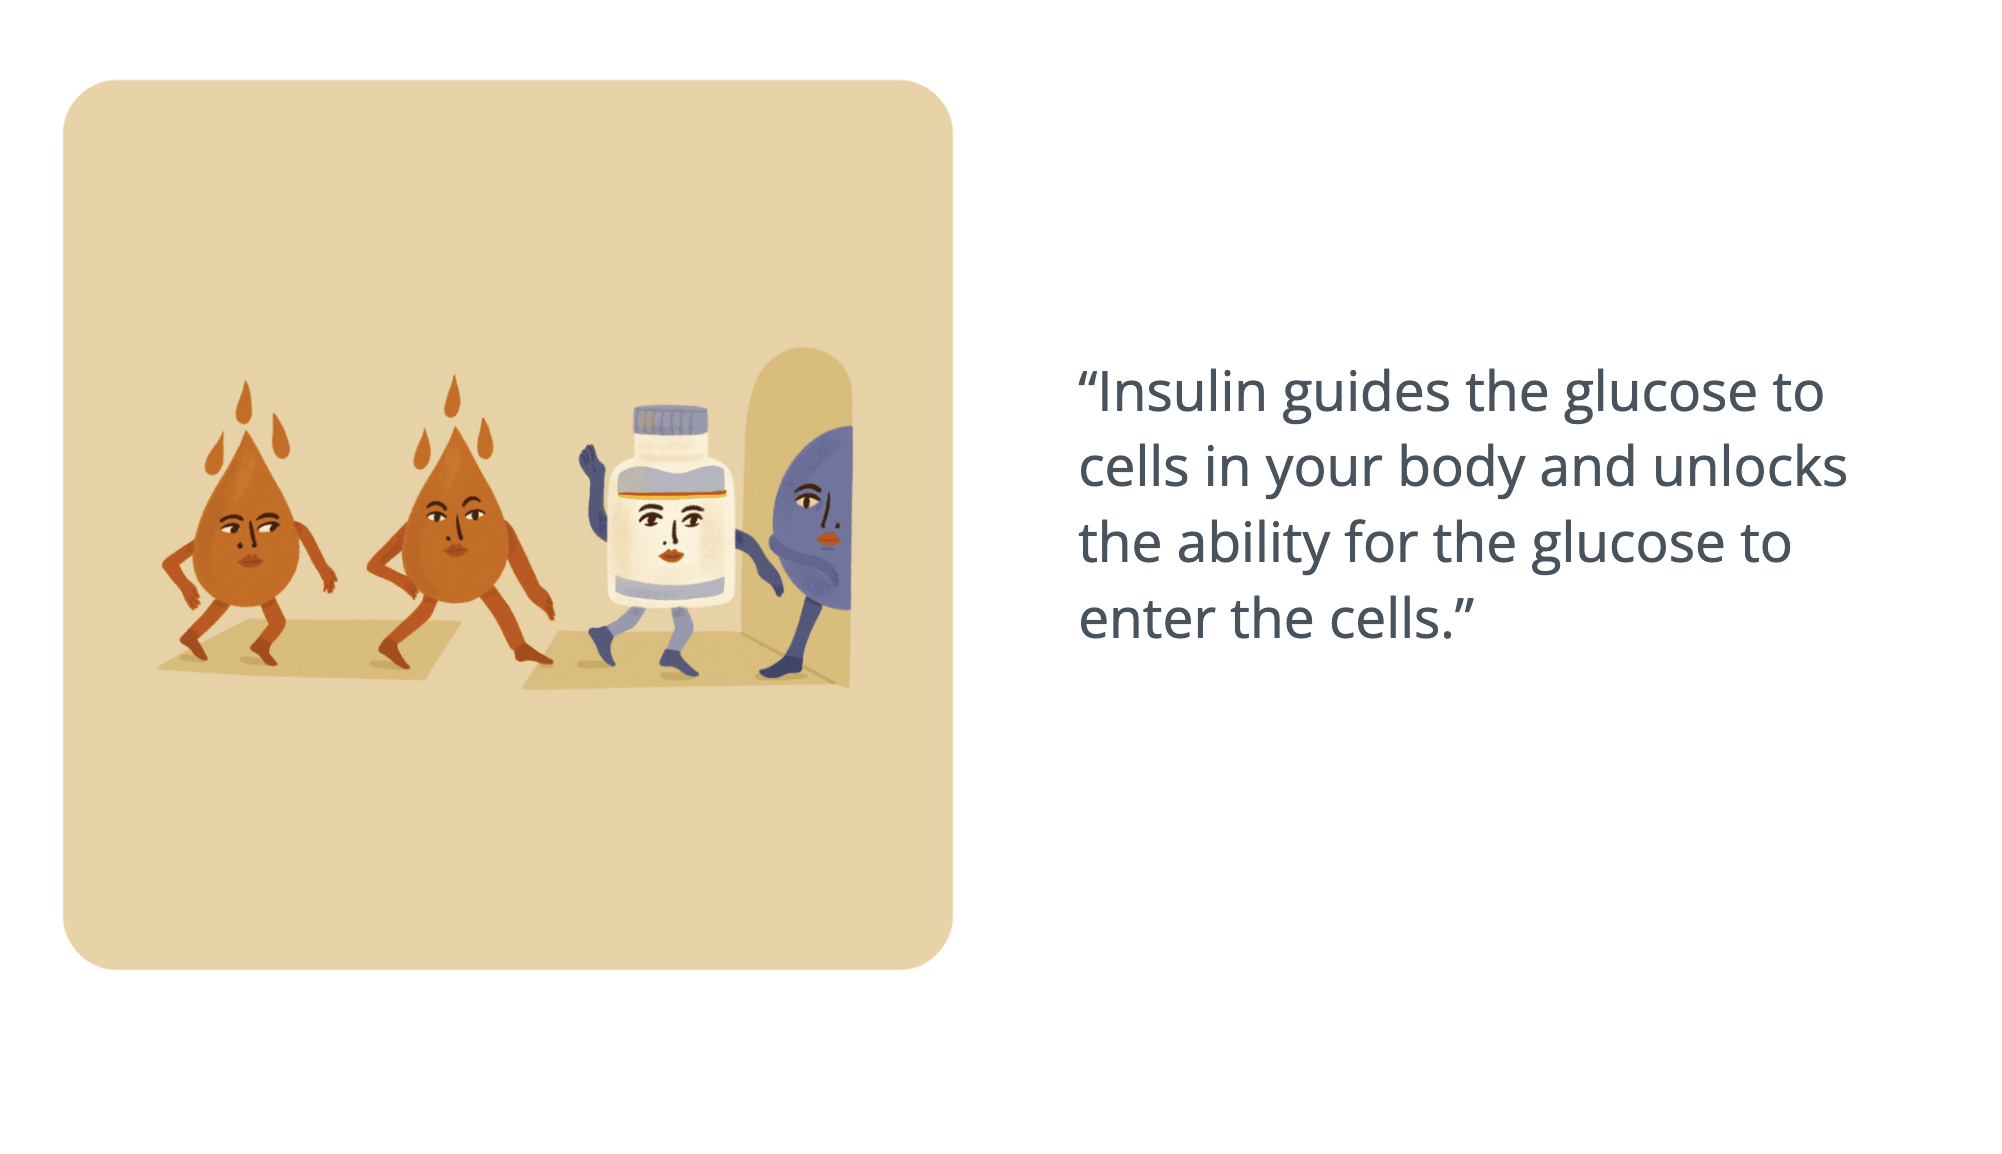 image of characterized blood glucose molecules, an insulin moleule, and a cell opening a door - card reads: "“Insulin guides the glucose to cells in your body and unlocks the ability for the glucose to enter the cells.”